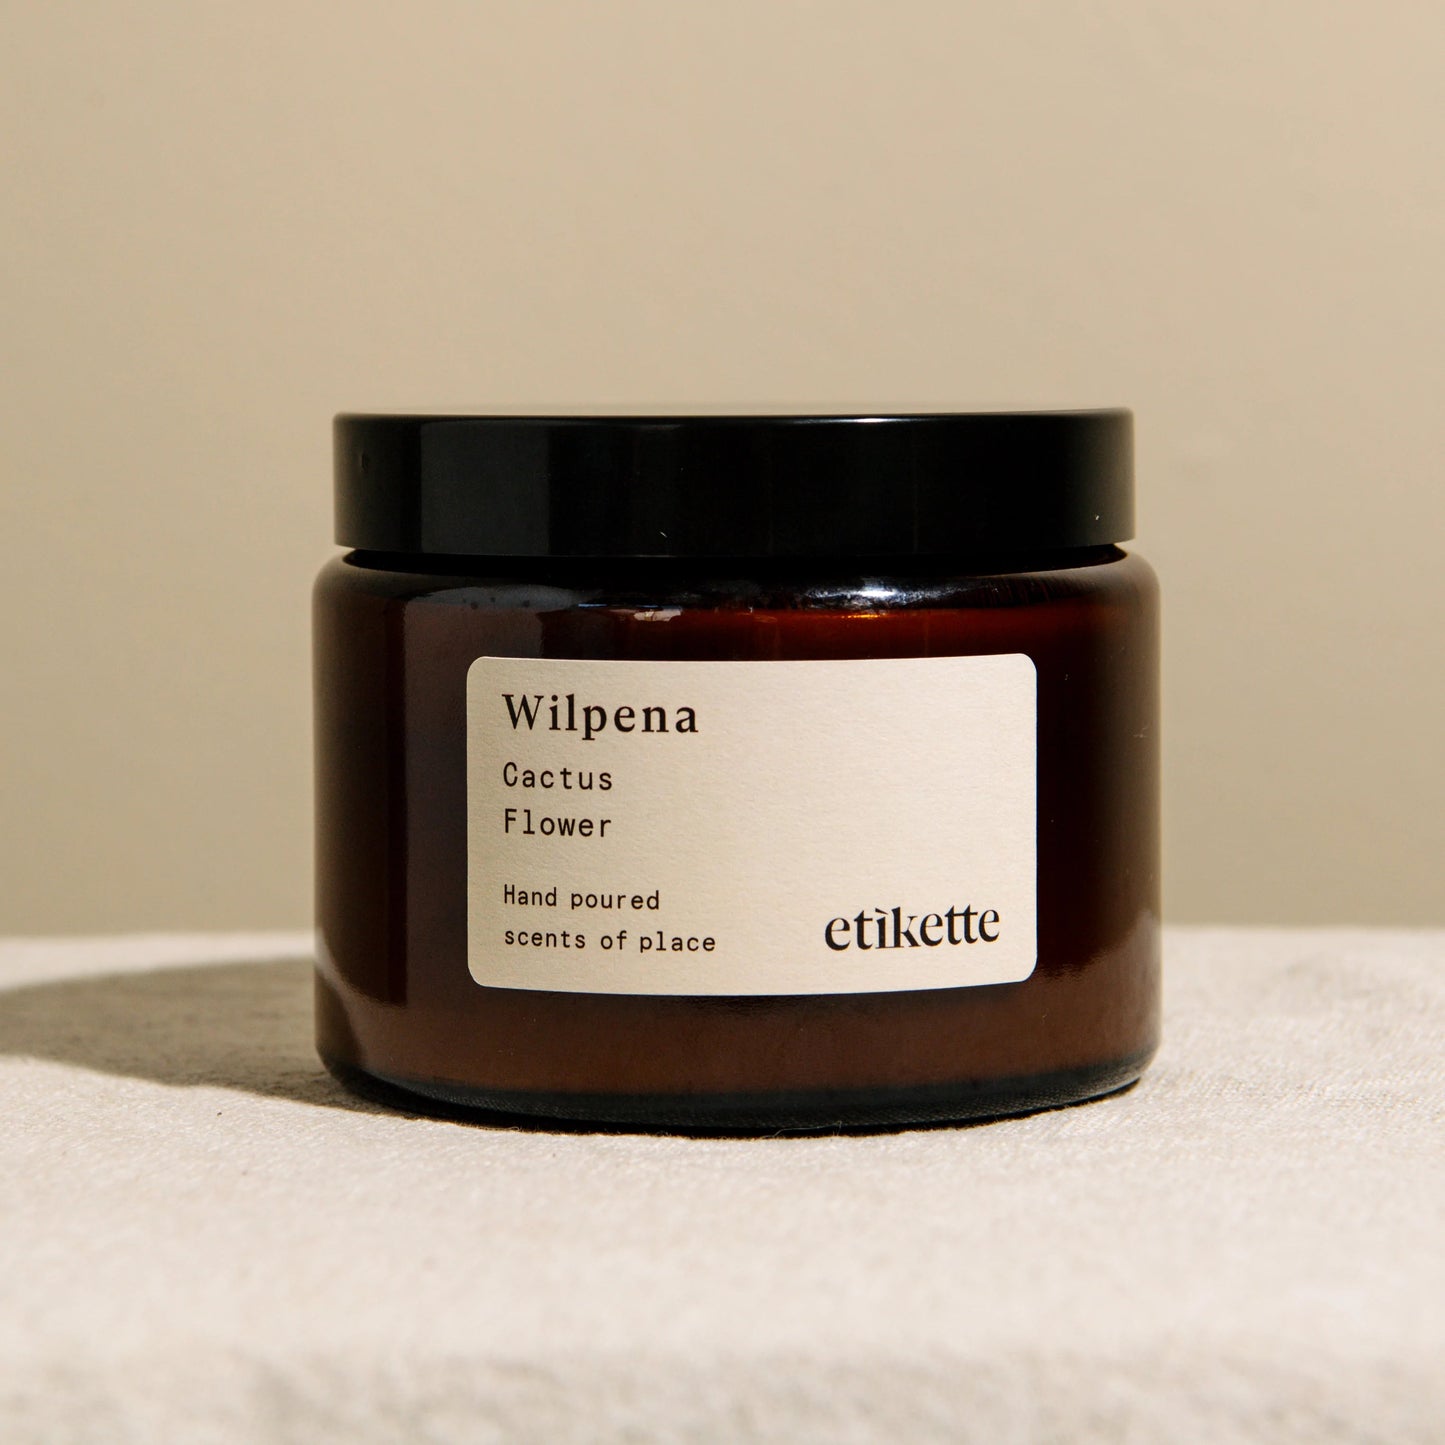 Wilpena Cactus Flower Double Wick Candle by Etikette - Toast and honey studio